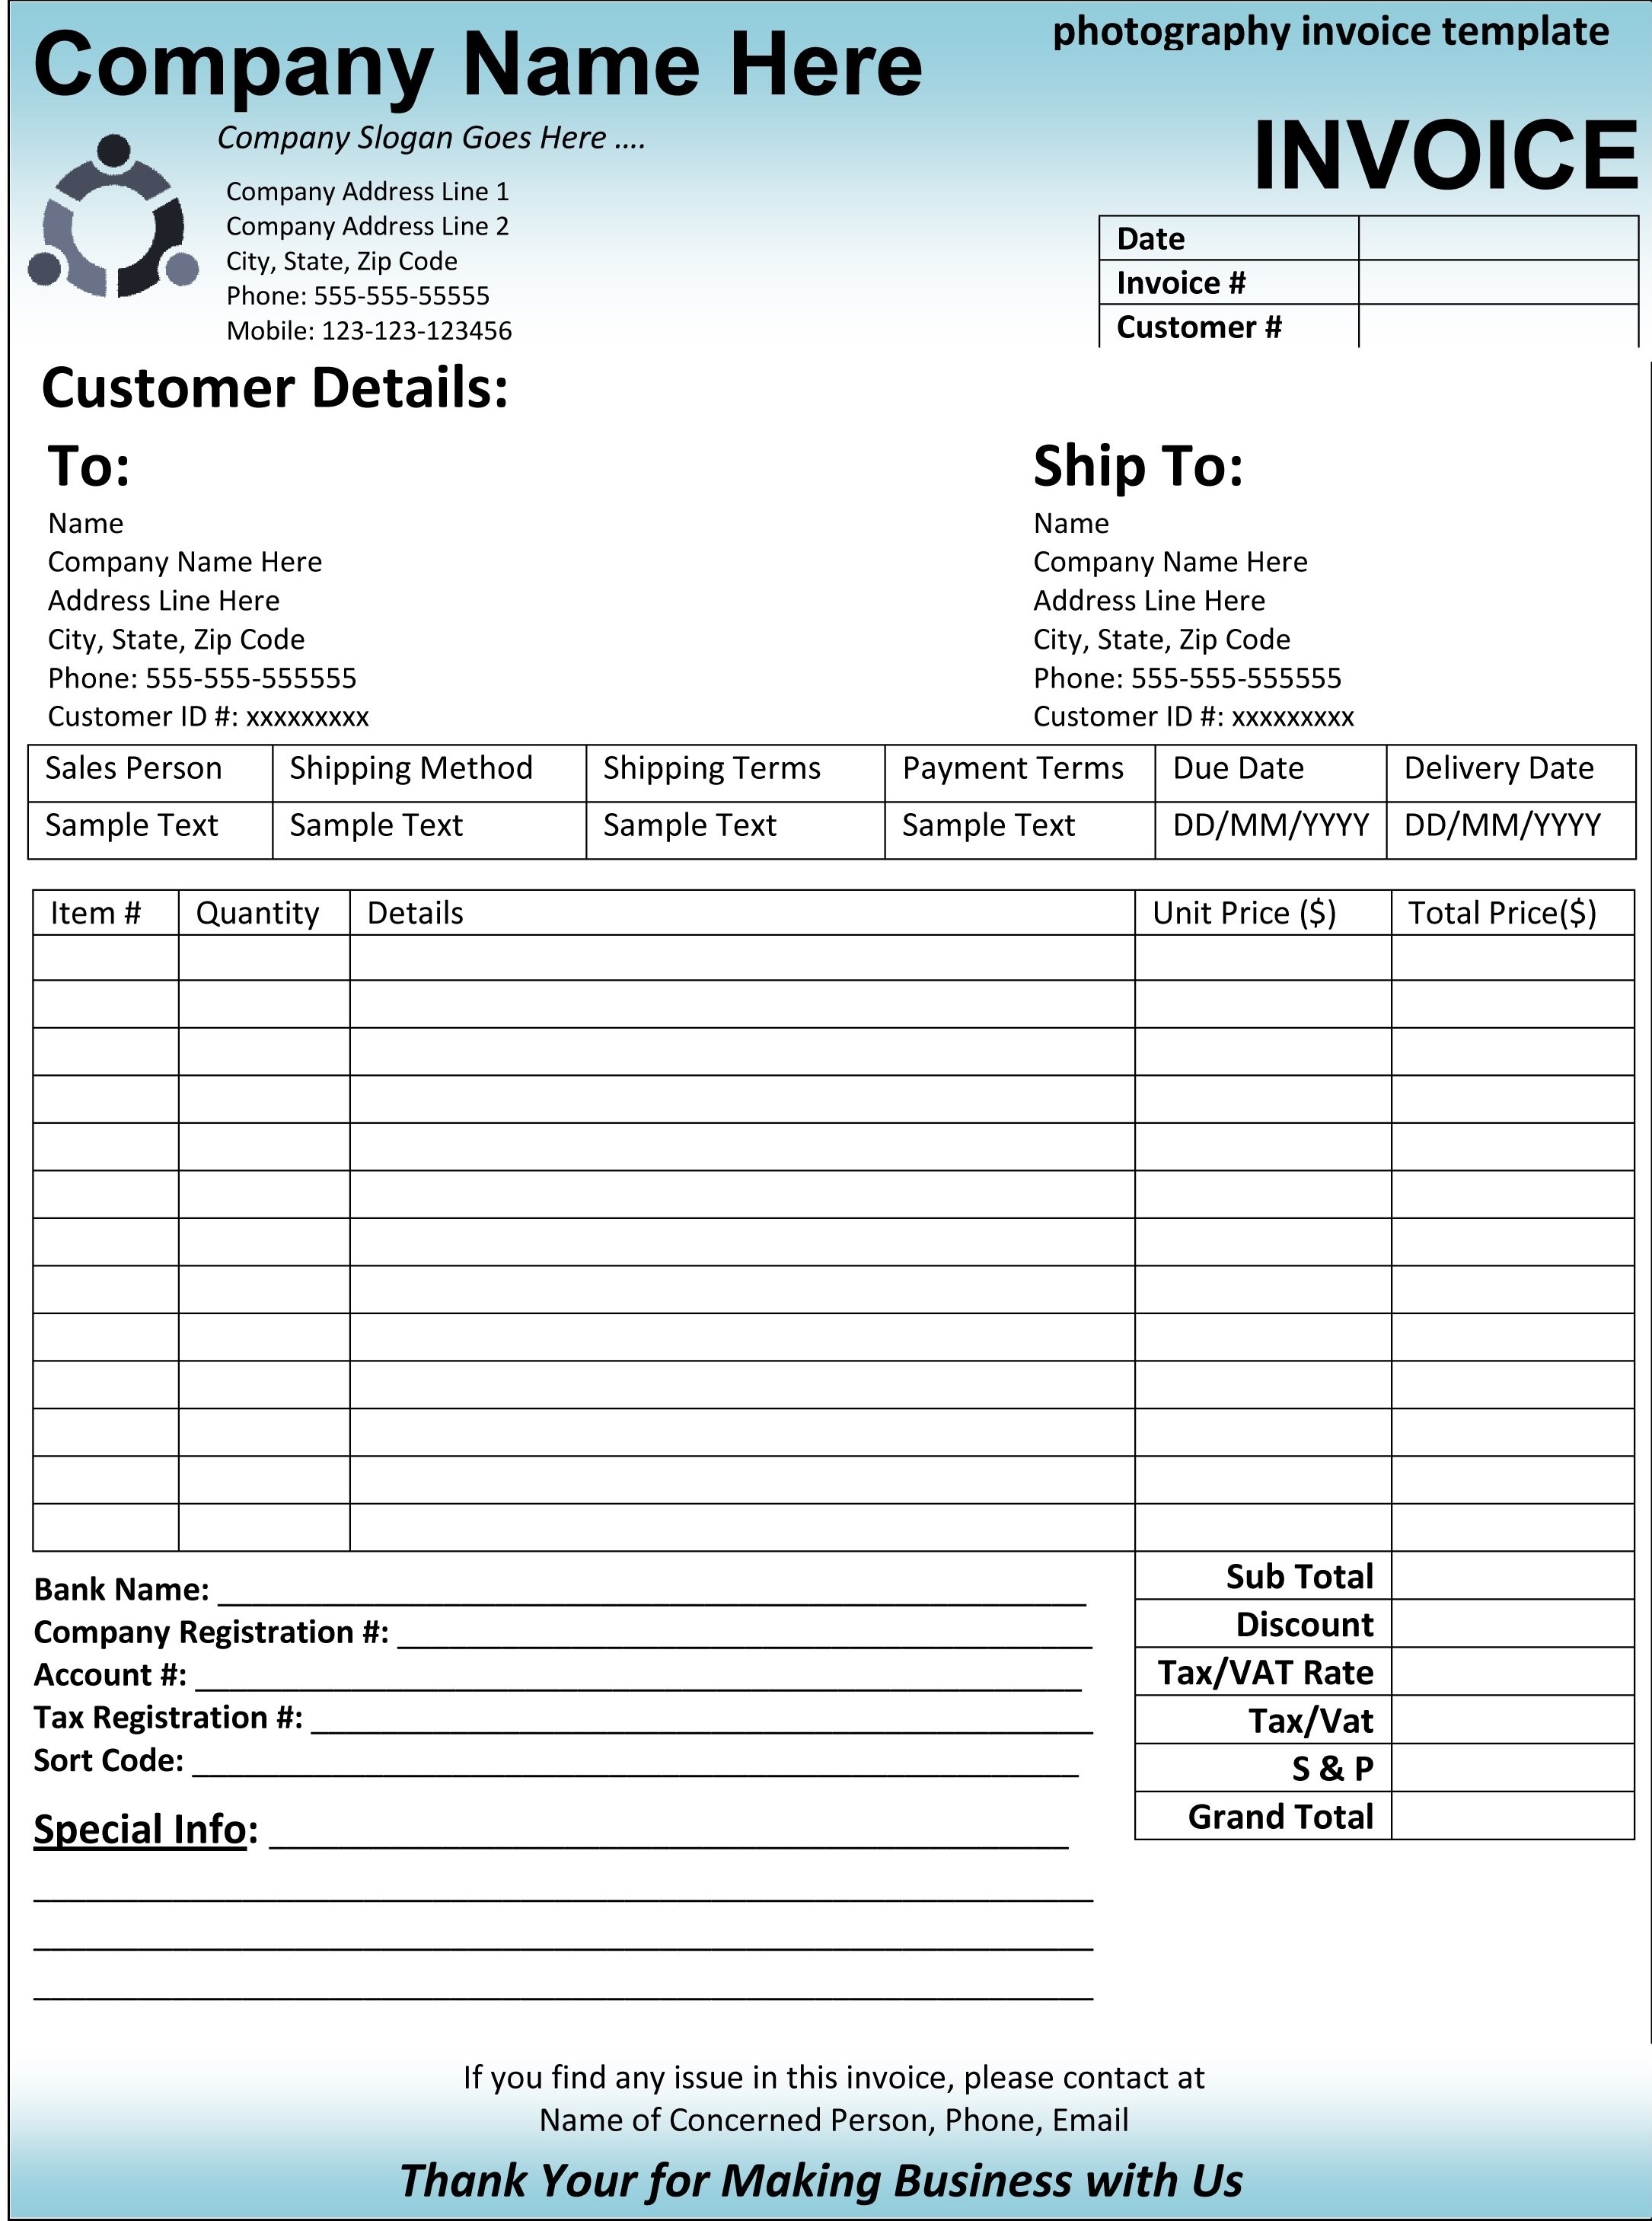 attorney invoice template lawyer invoice template excel legal attorney invoice invoic legal 2170 X 2917